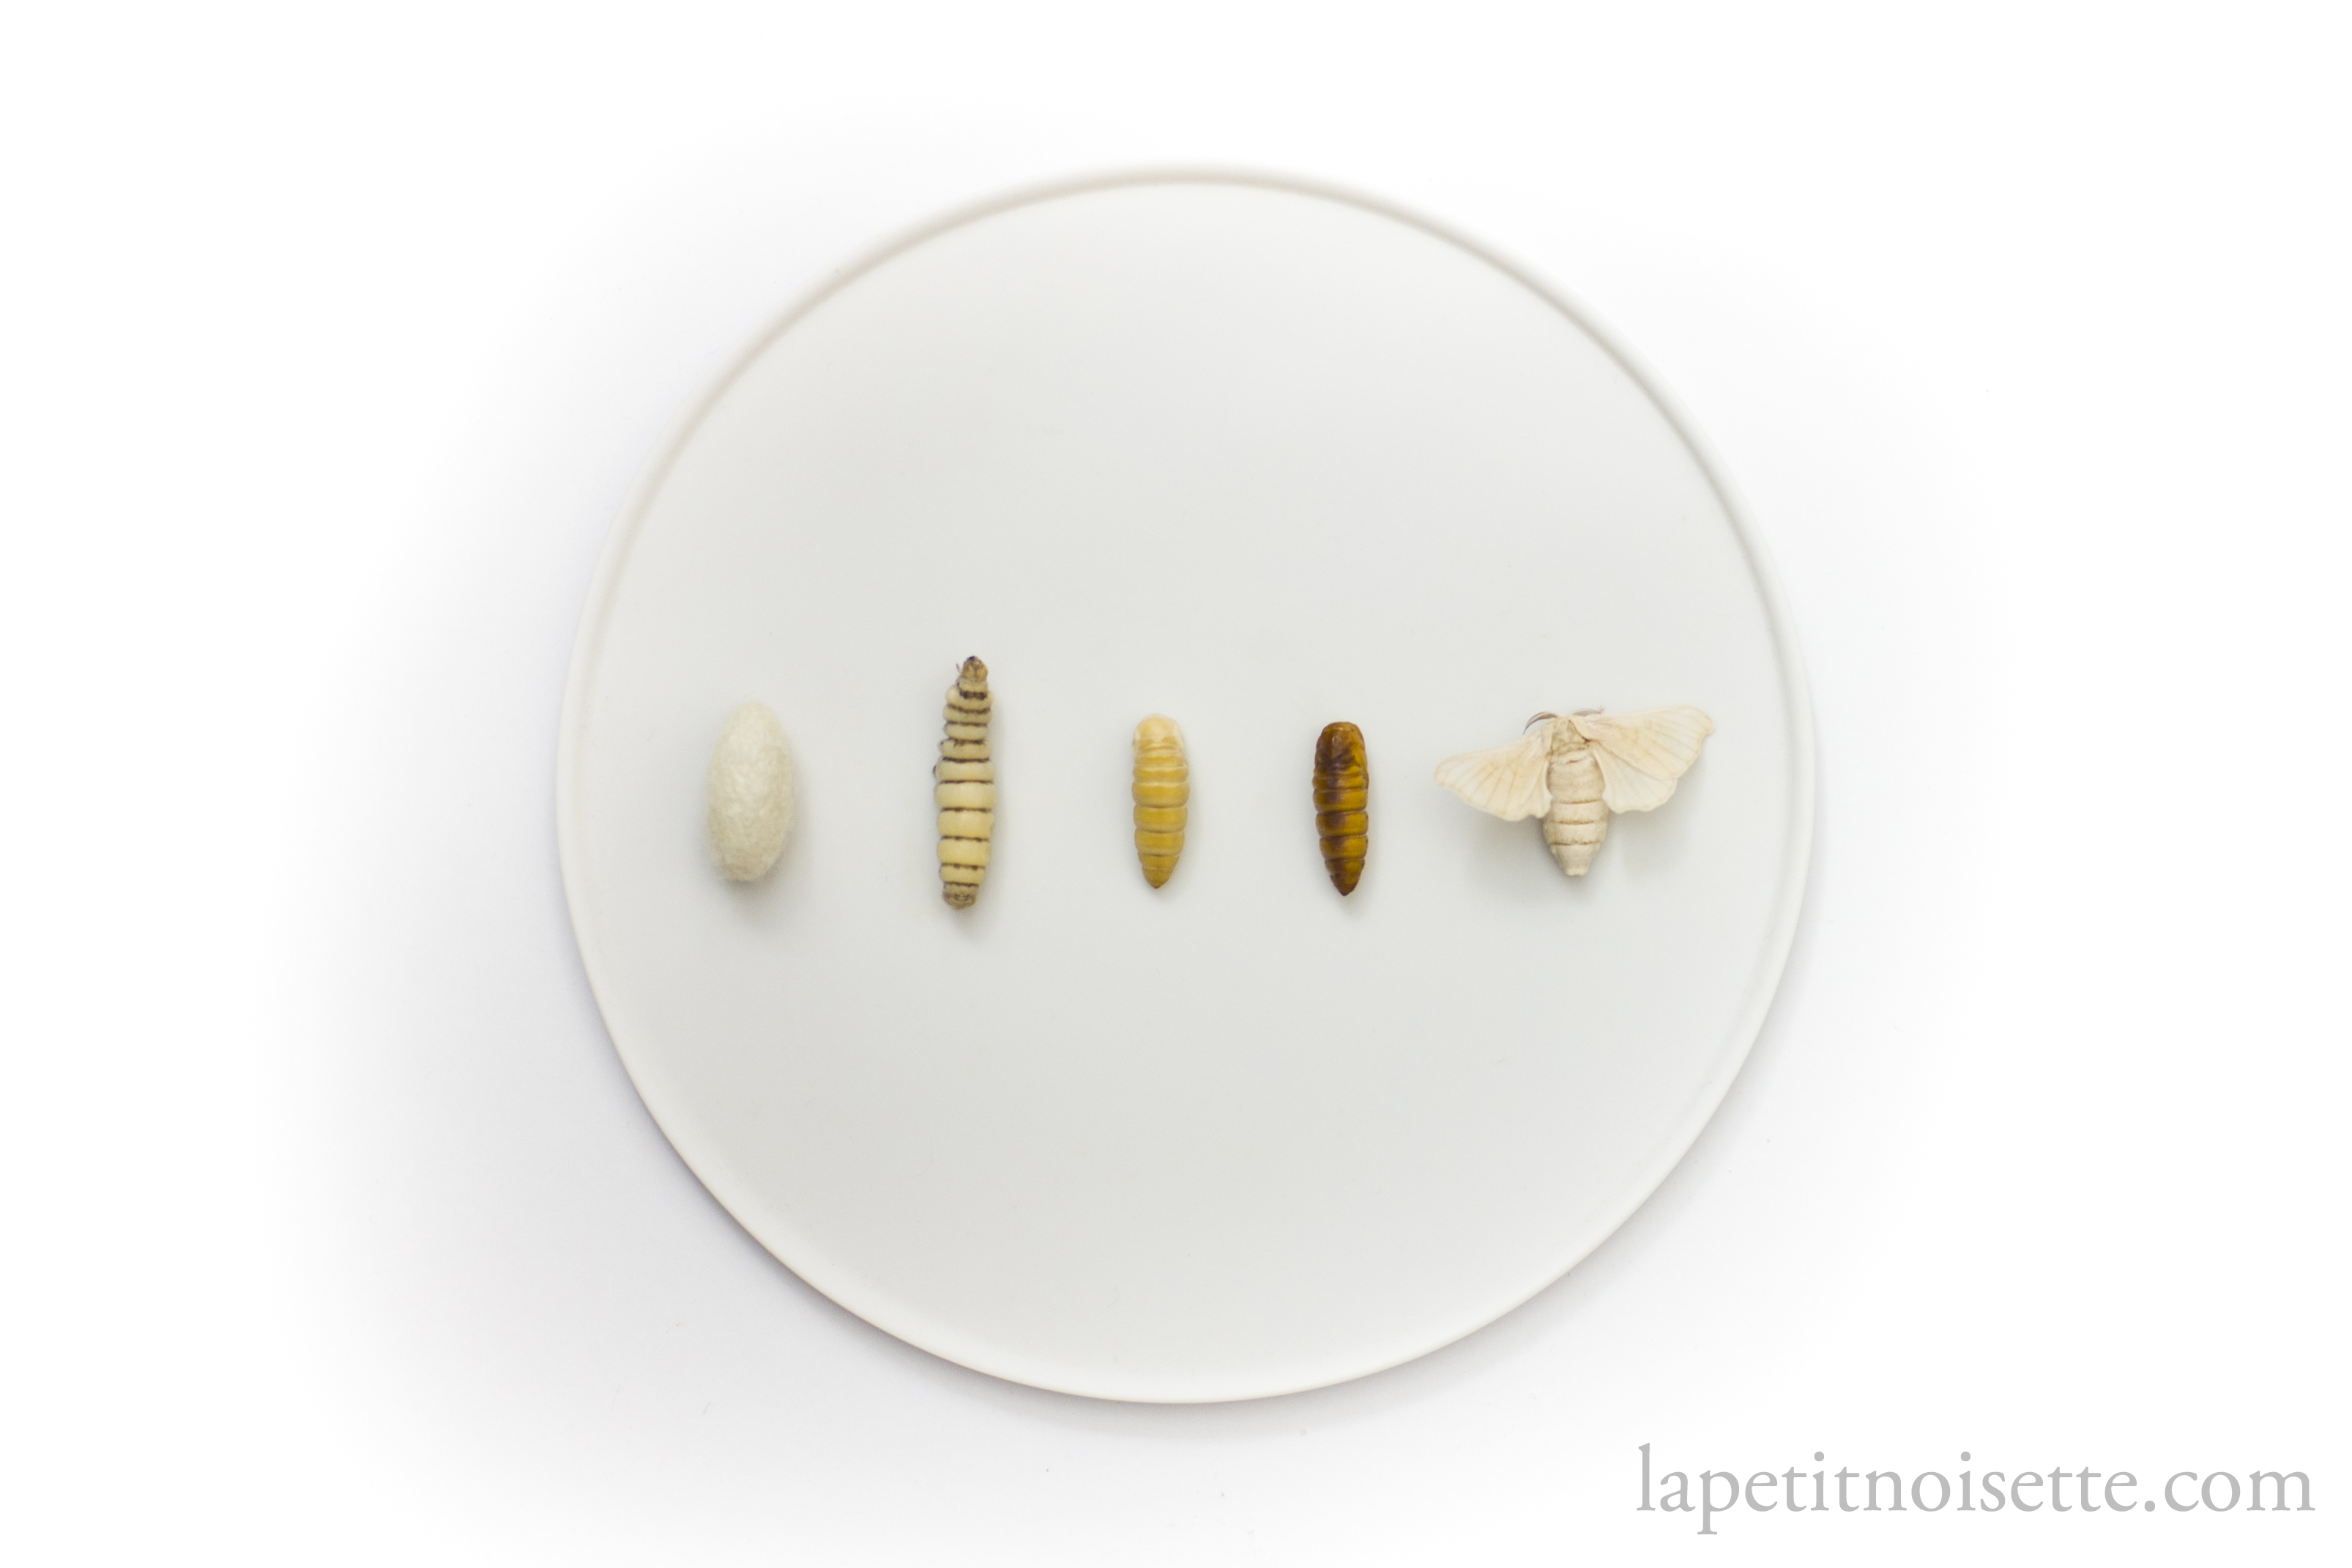 The different life stages of a silkworm from worm to moth.